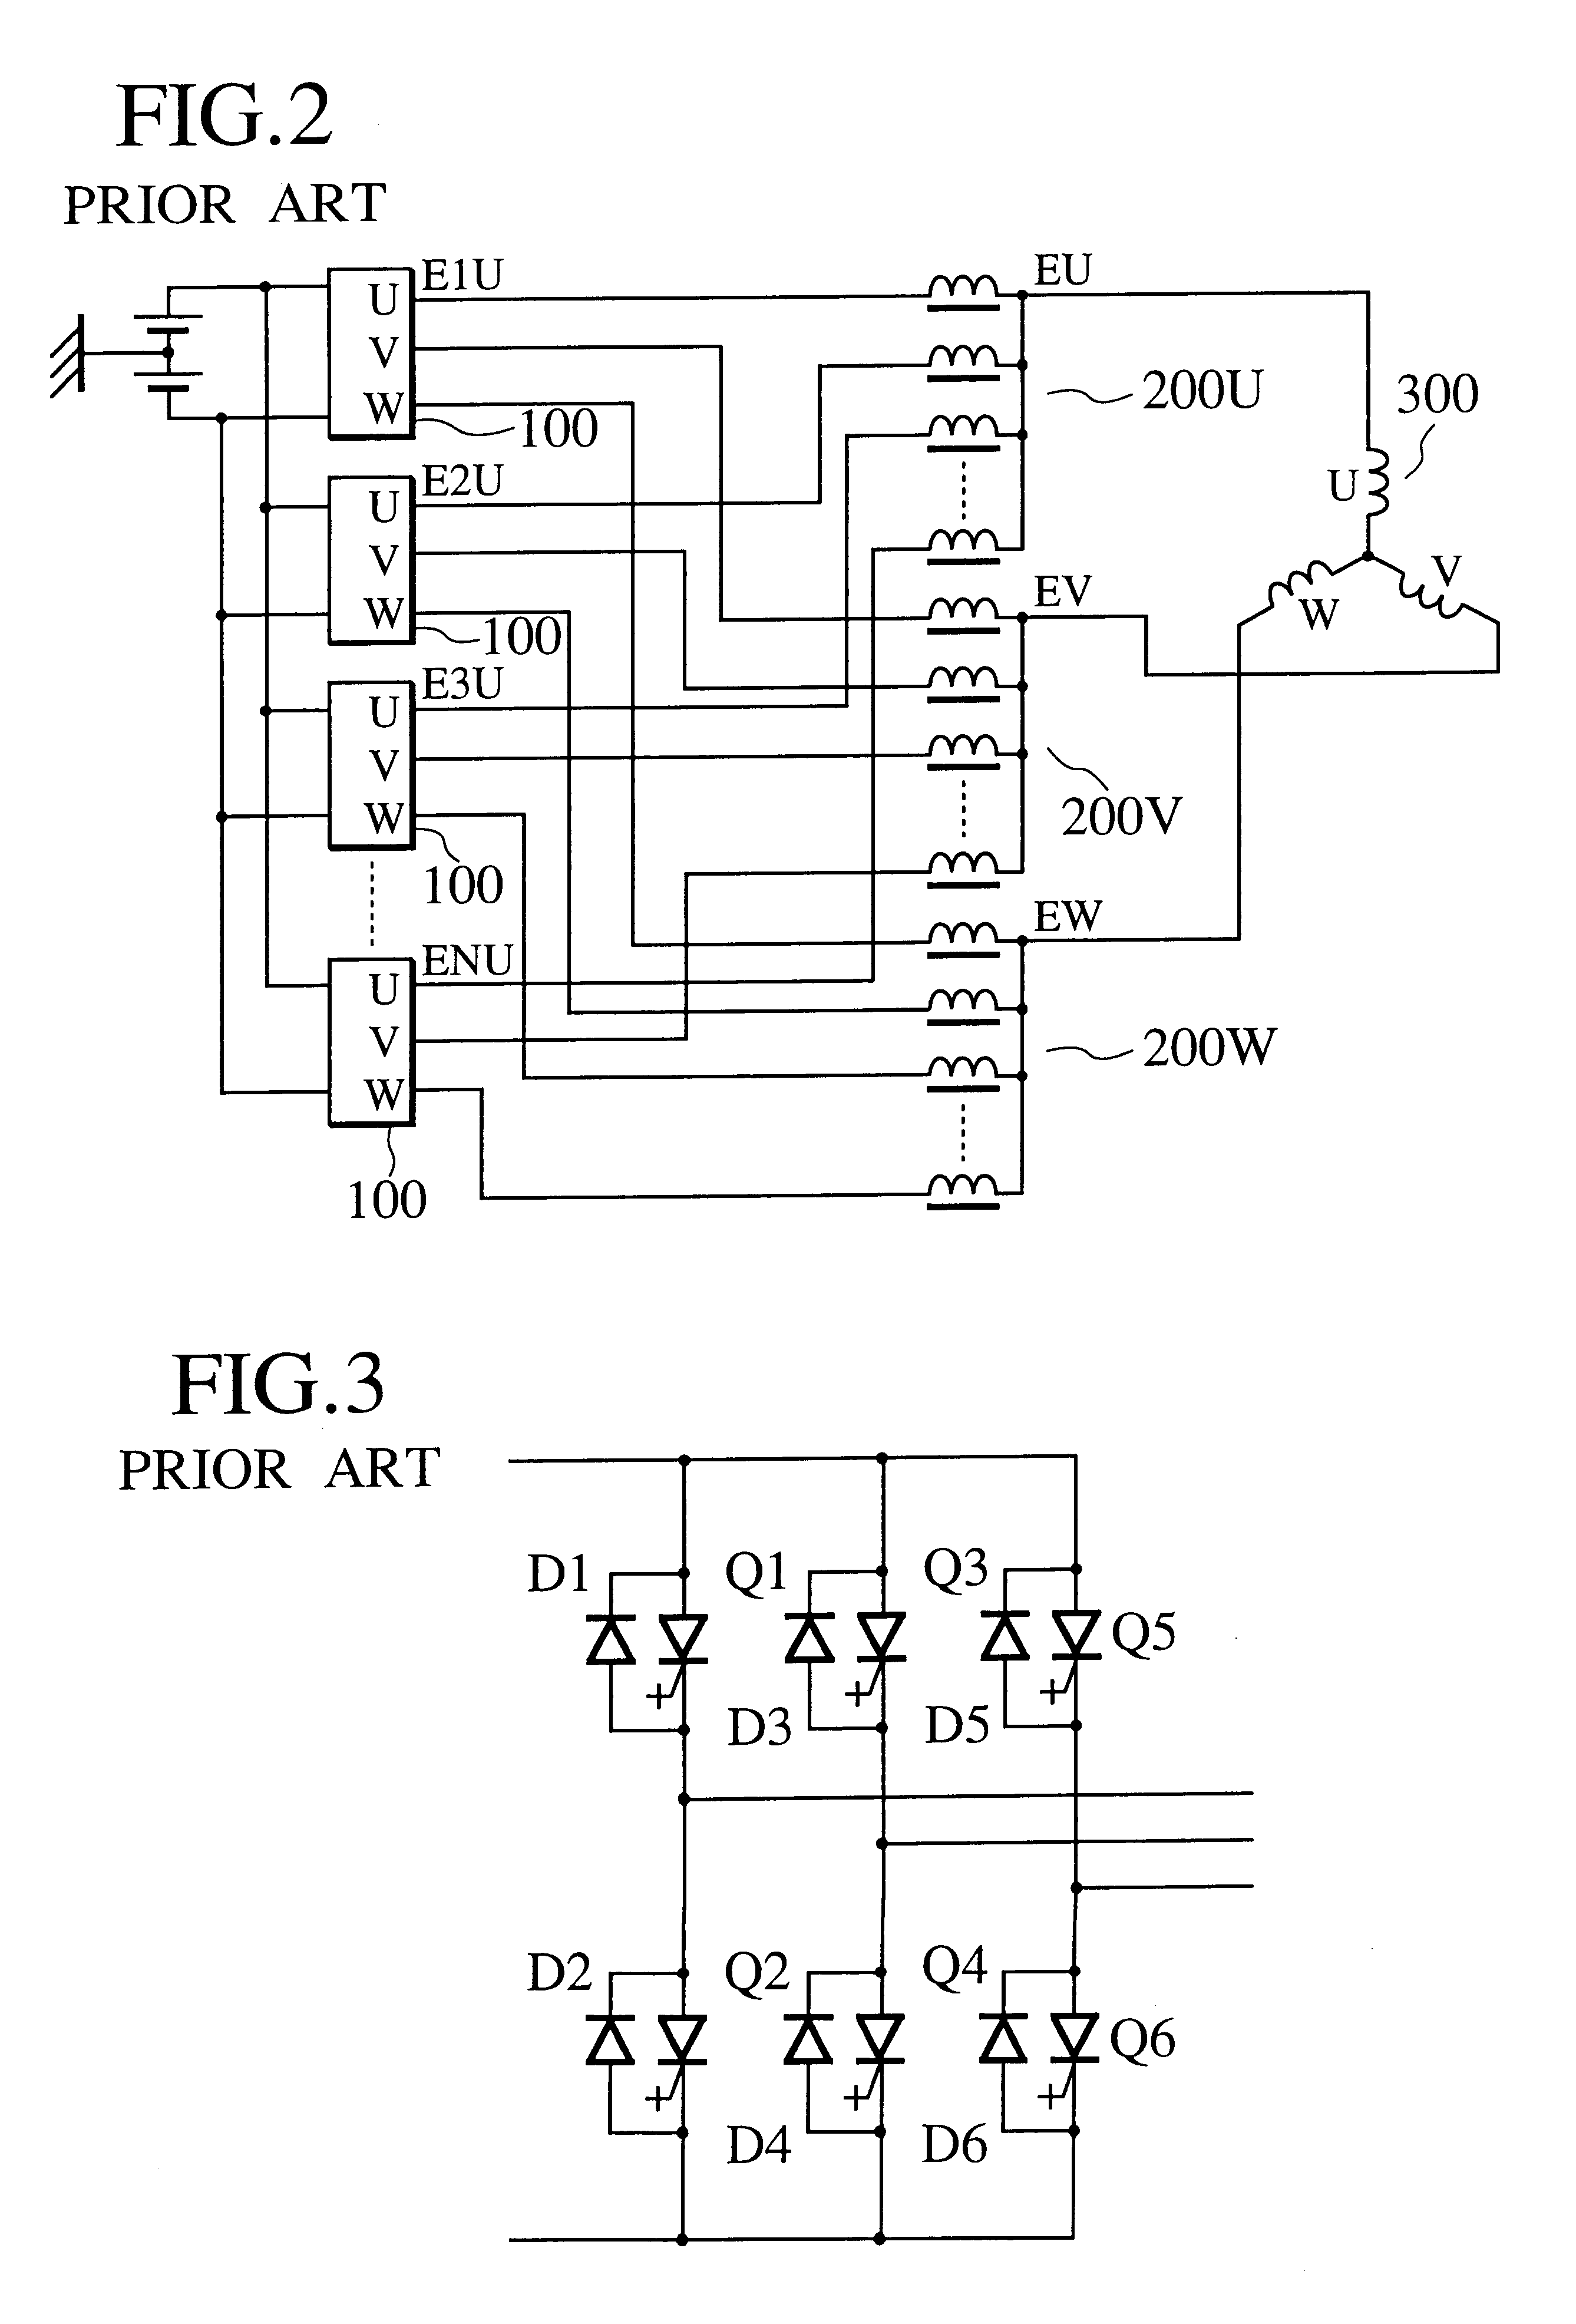 Power converting system multiplexed with voltage dividing transformers, the voltage transformers, and controller for the system